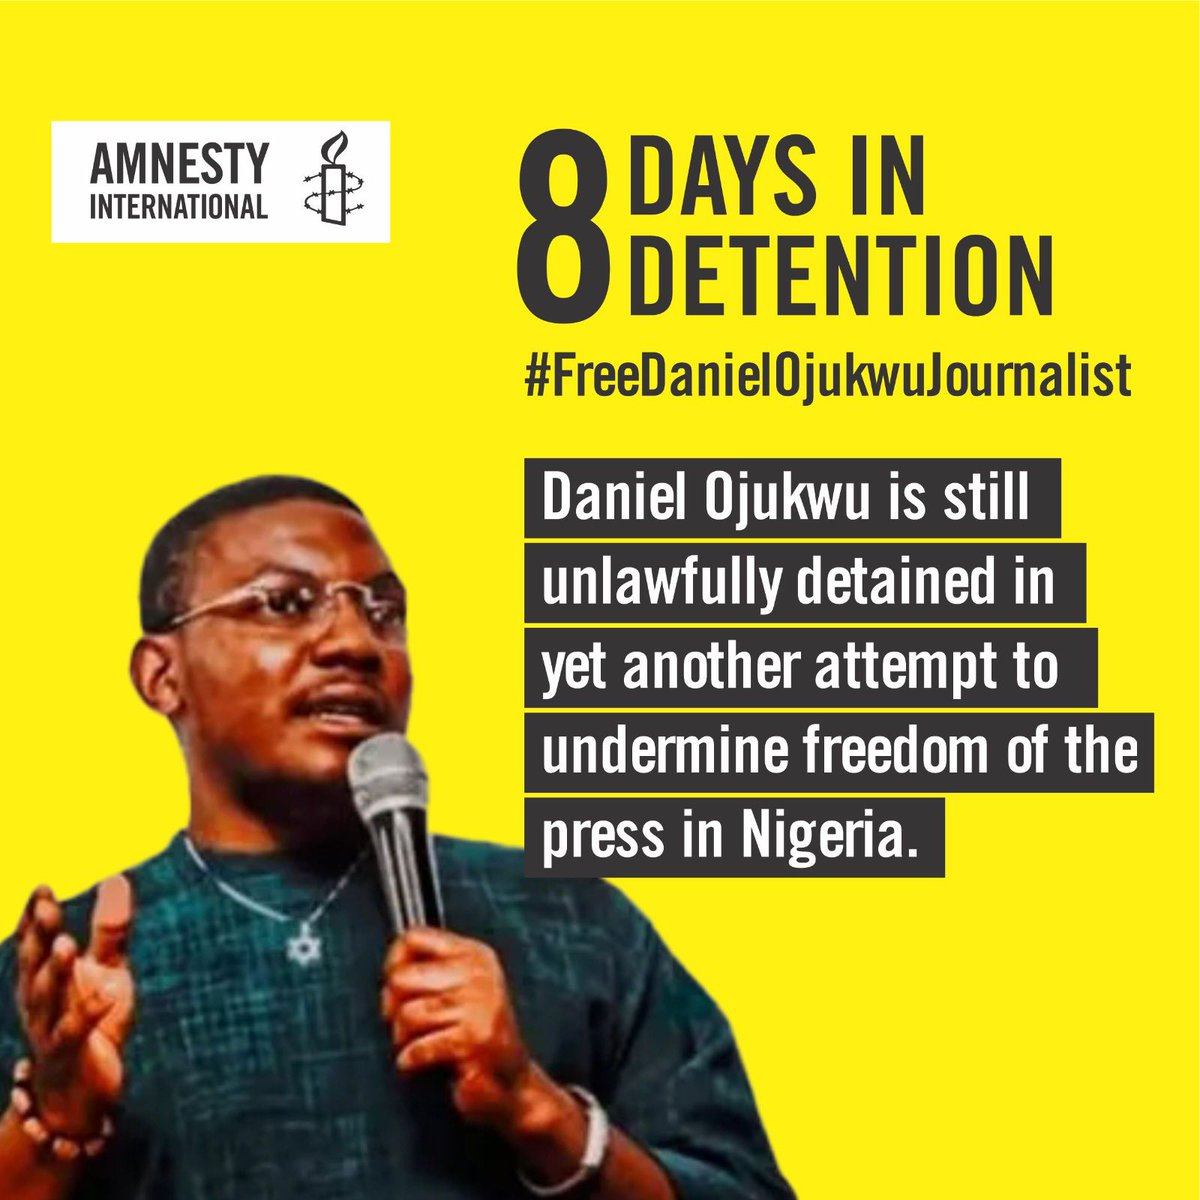 Amnesty International again calls on the Nigerian authorities to release Daniel Ojukwu — who is unlawfully detained and to stop targeting journalists merely for doing their job, and end the misuse of the Cyber Crimes Act (2015) to silence journalists and critics.